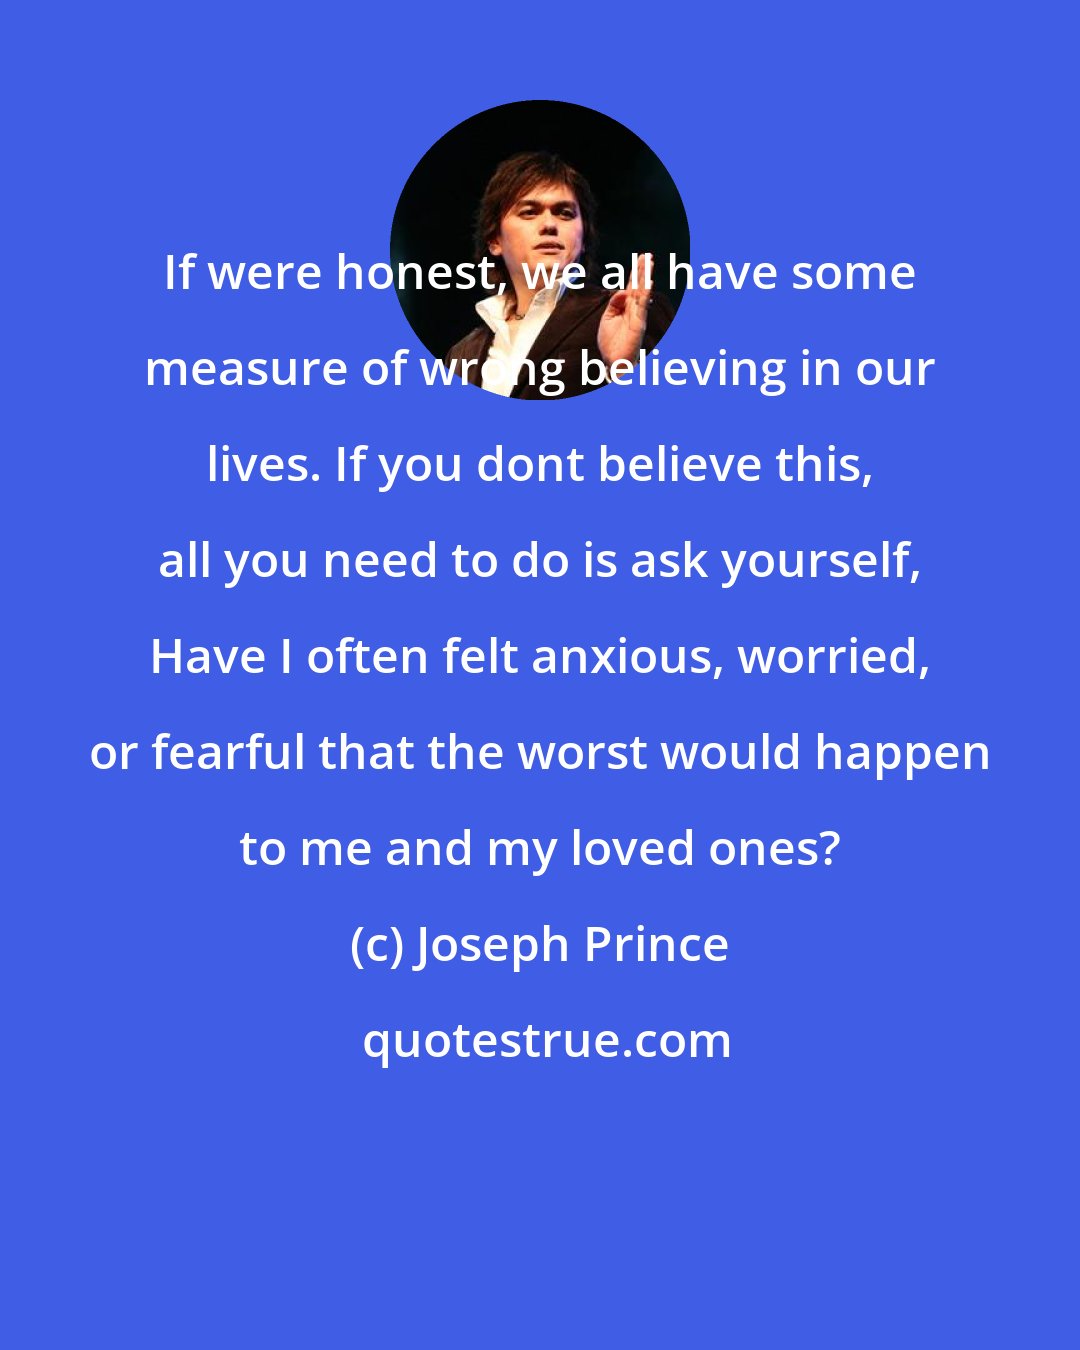 Joseph Prince: If were honest, we all have some measure of wrong believing in our lives. If you dont believe this, all you need to do is ask yourself, Have I often felt anxious, worried, or fearful that the worst would happen to me and my loved ones?